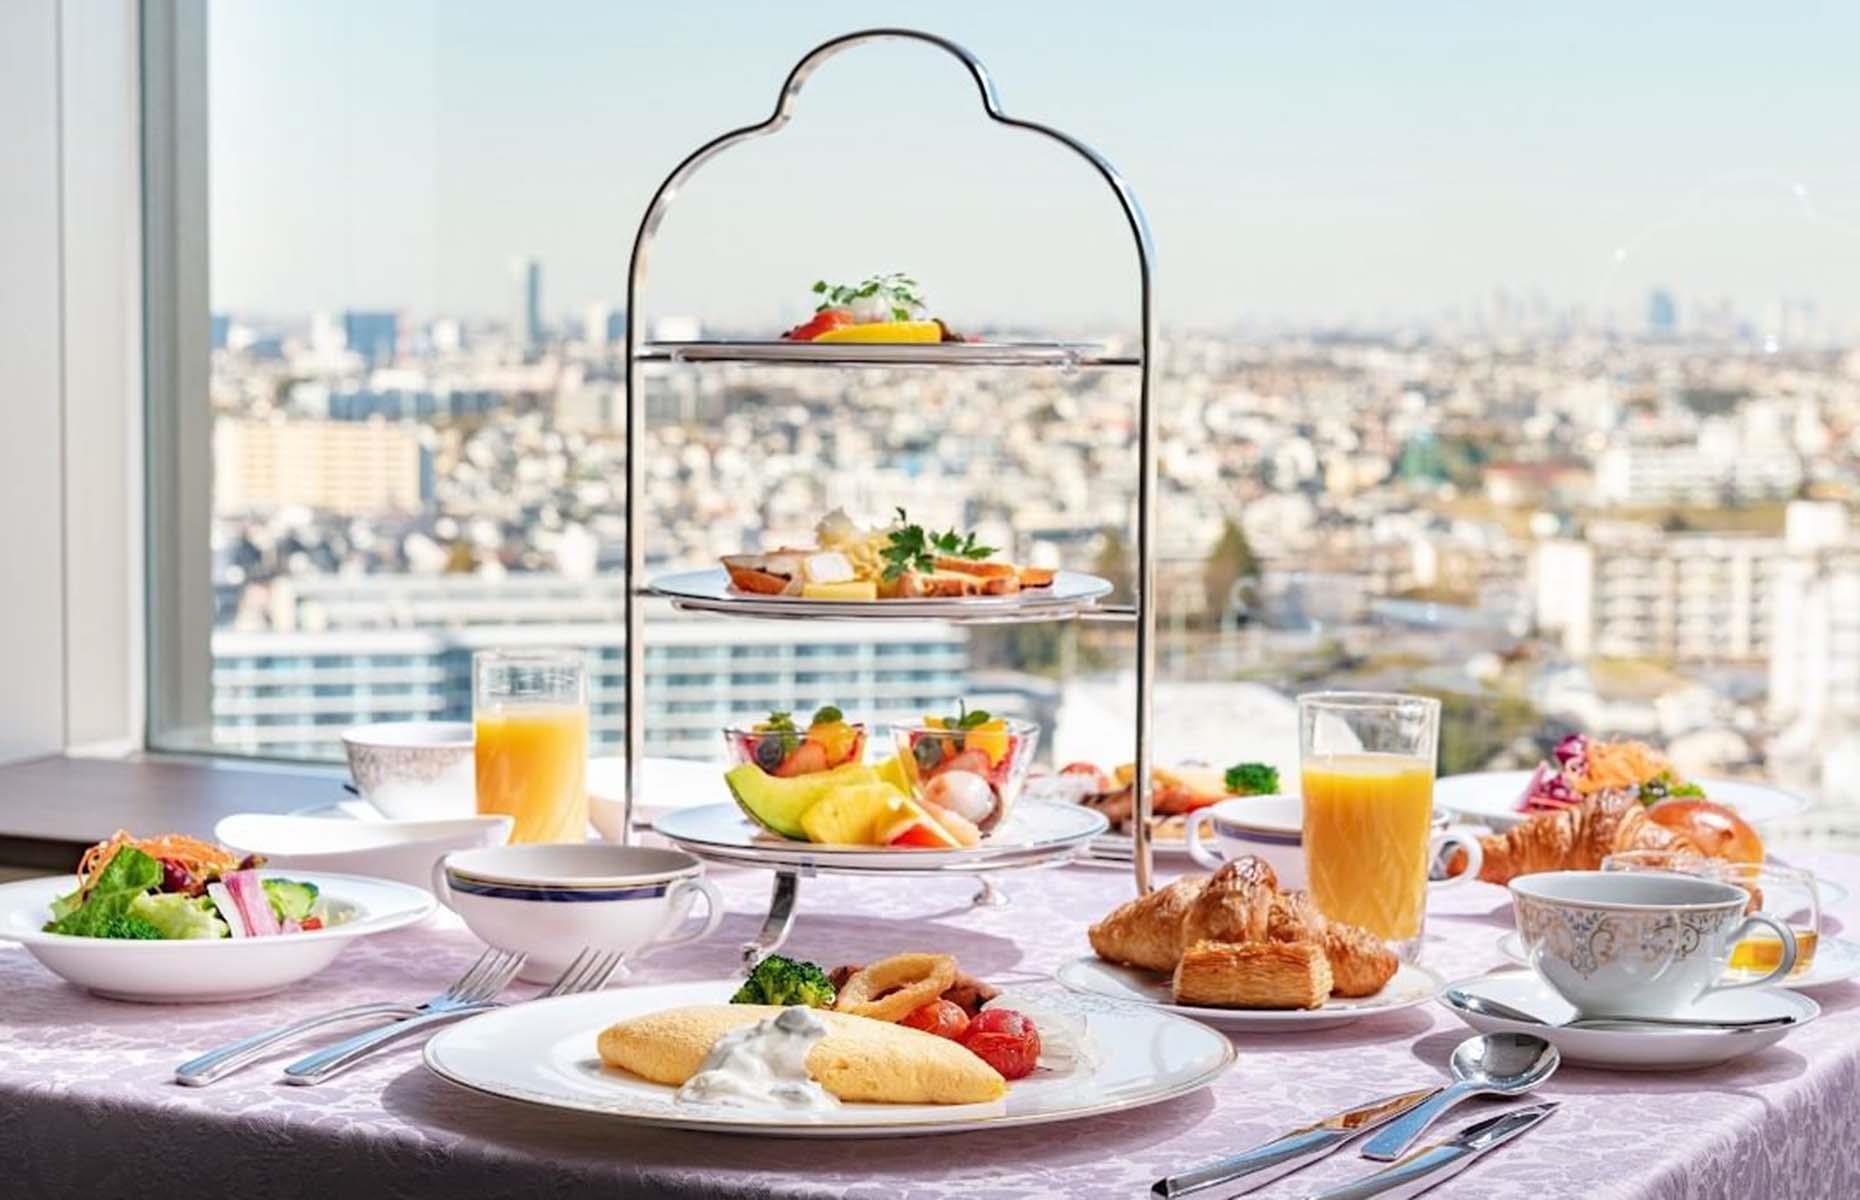 <p>In Japan’s second-largest city, <a href="https://www.marriott.co.uk/hotels/travel/tyoys-yokohama-bay-sheraton-hotel-and-towers/">The Sheraton Yokohama Bay</a> provides breakfast for its guests at an extra cost. This allows you plenty of choice though, as there are three different breakfast spots within the hotel. The main option is Compass, an all-day dining restaurant with a global buffet of seasonal salads, pastries, cloud-like omelets and unlimited combinations. They also offer a Kanagawa breakfast, placing a spotlight on dishes and ingredients eaten traditionally across the prefecture. If you’re in a hurry, grab a drink and a quick bite at Seawind coffee house or Dorer bakery.</p>